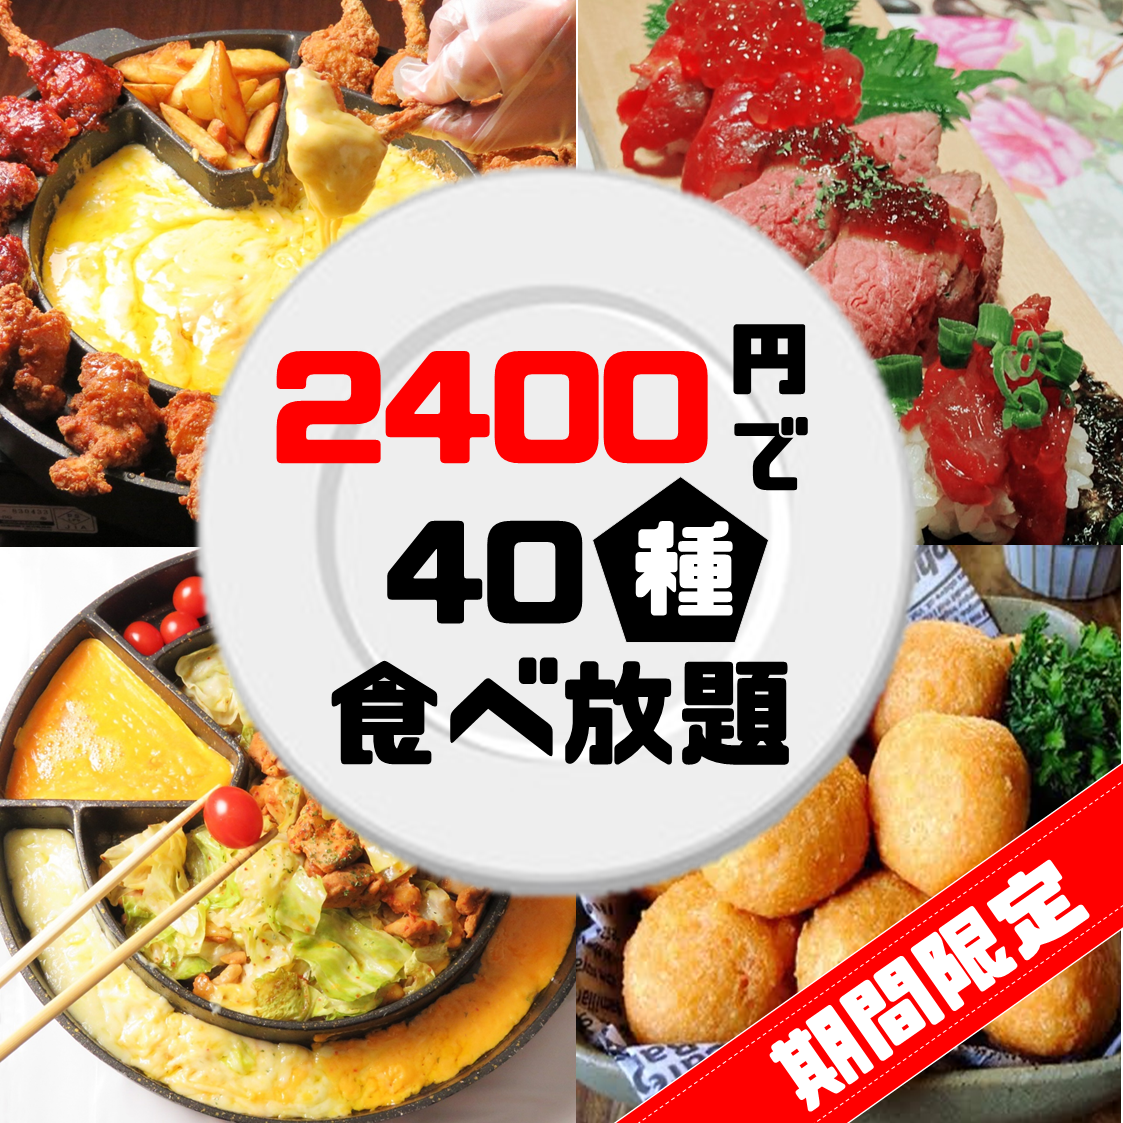 Meat, cheese and Korean food are recommended! 5 minutes walk from Sendai station All seats are open from noon in private rooms ◎